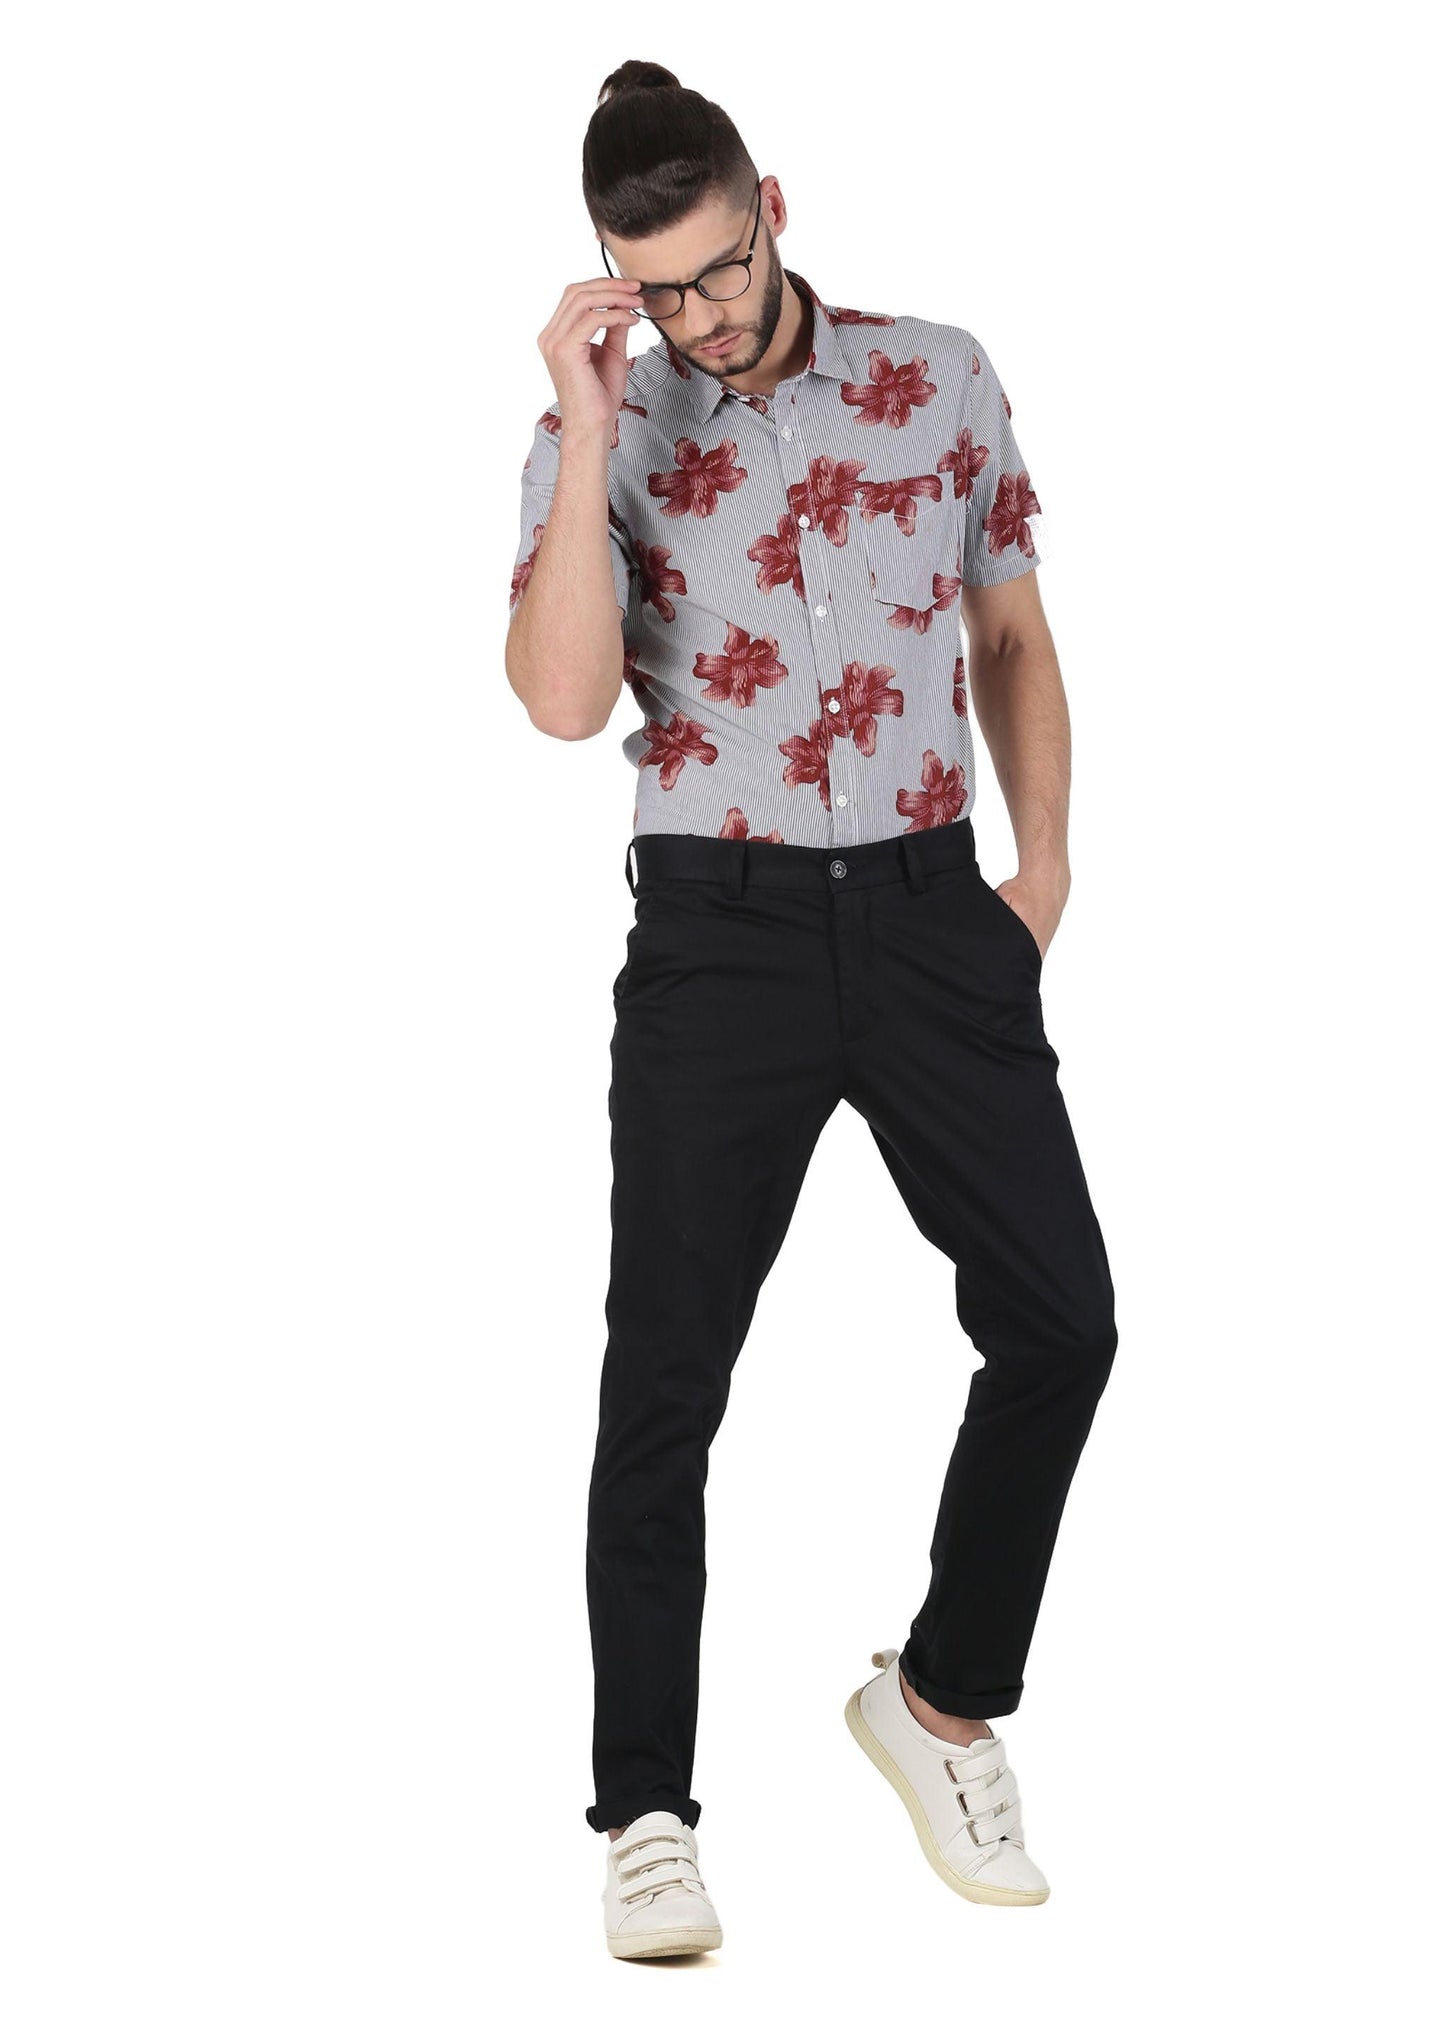 Tusok-brown-bloomFeatured Shirt, Vacation-Printed Shirtimage-Brown Bloom (4)